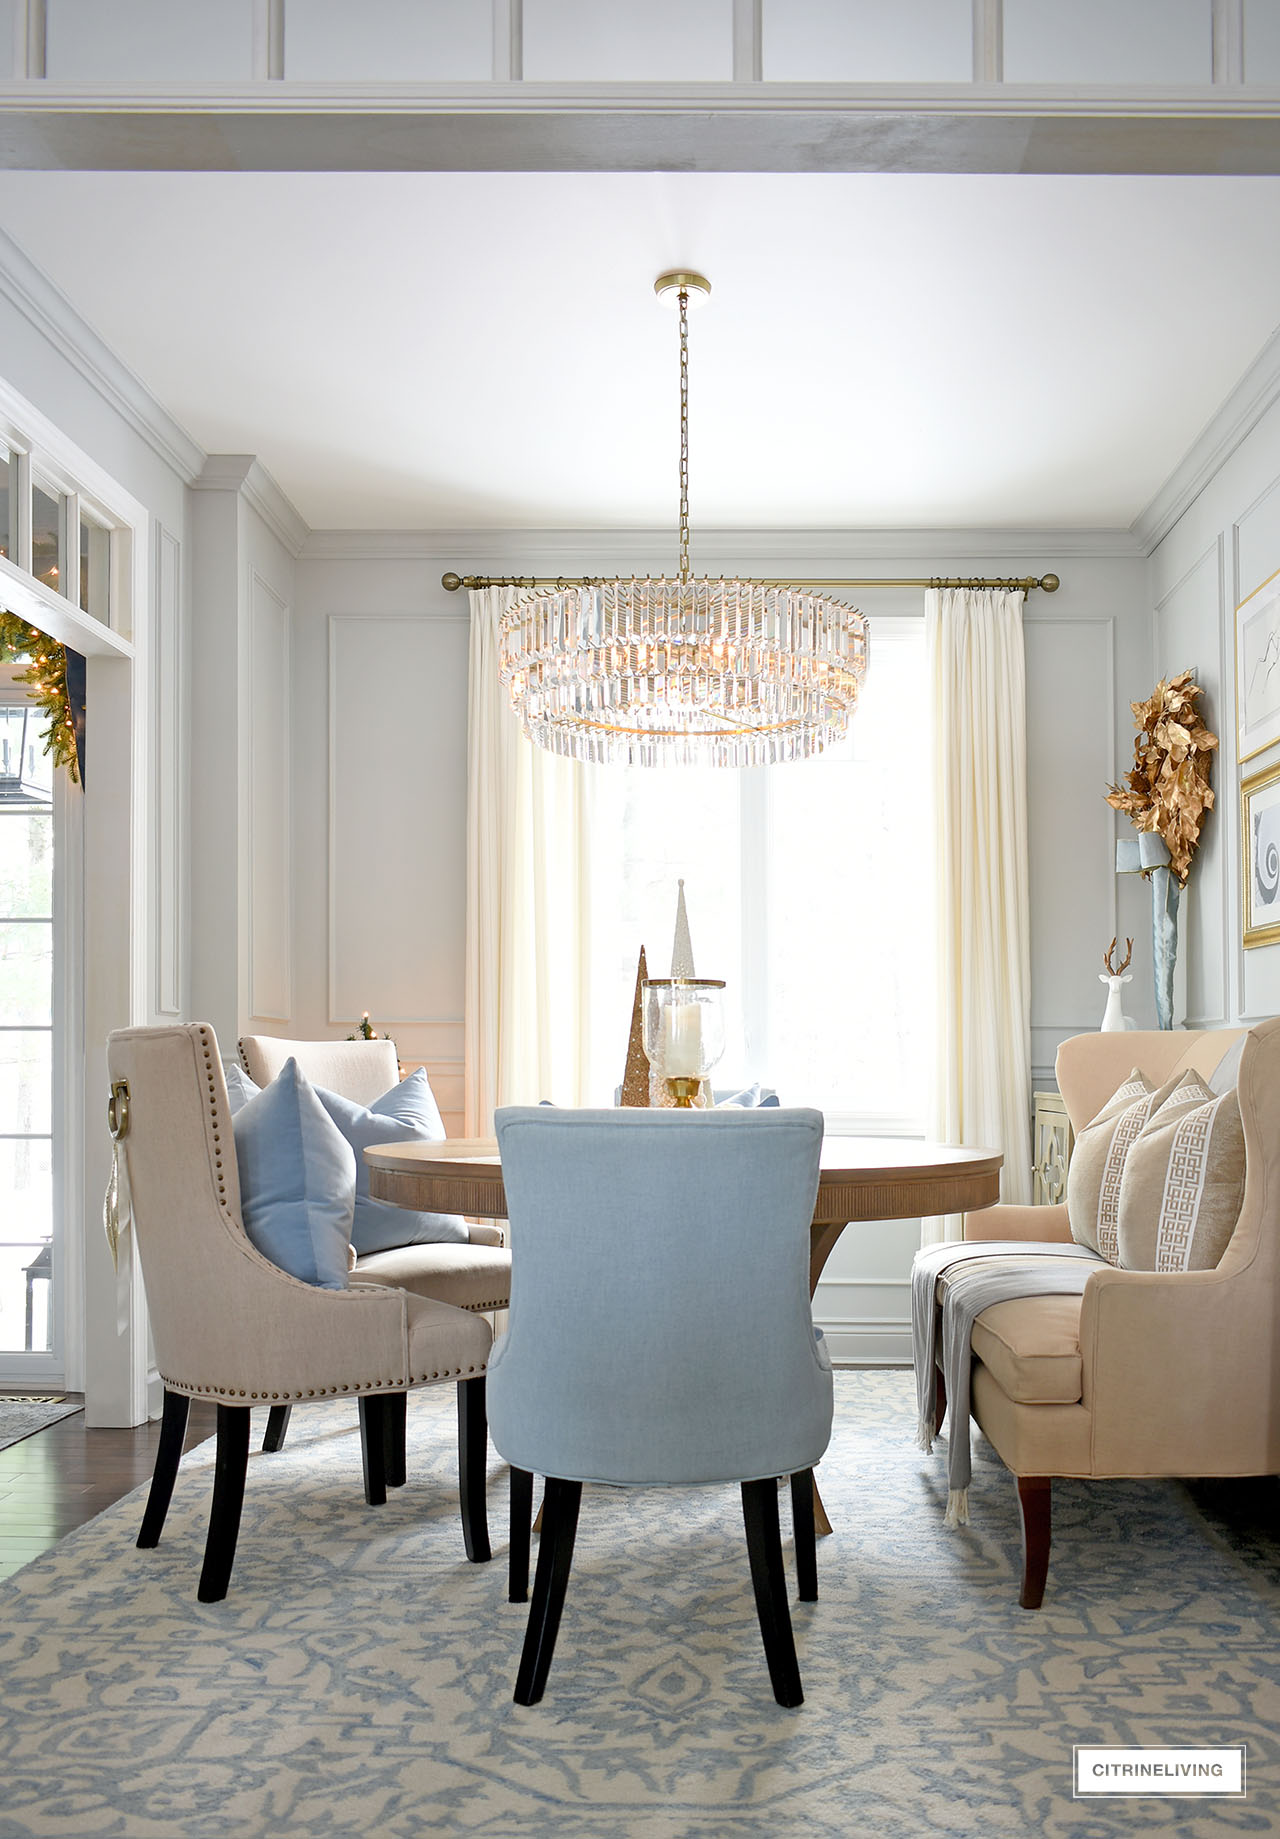 Christmas decorated dining room with simple and elegant decor in blue and gold.